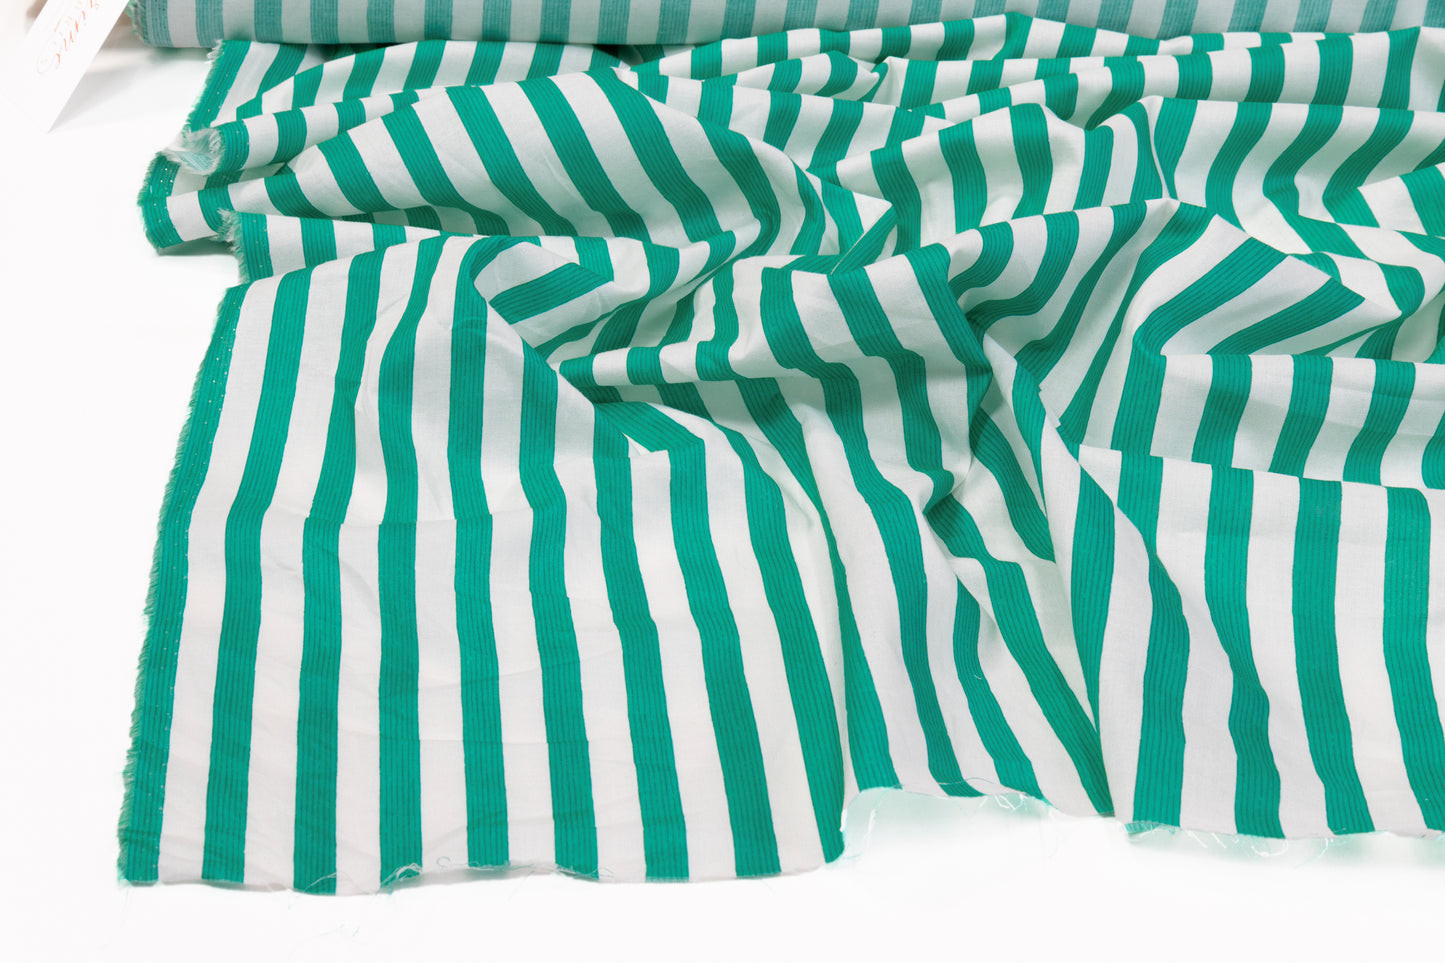 Striped Cotton - Teal Green and White